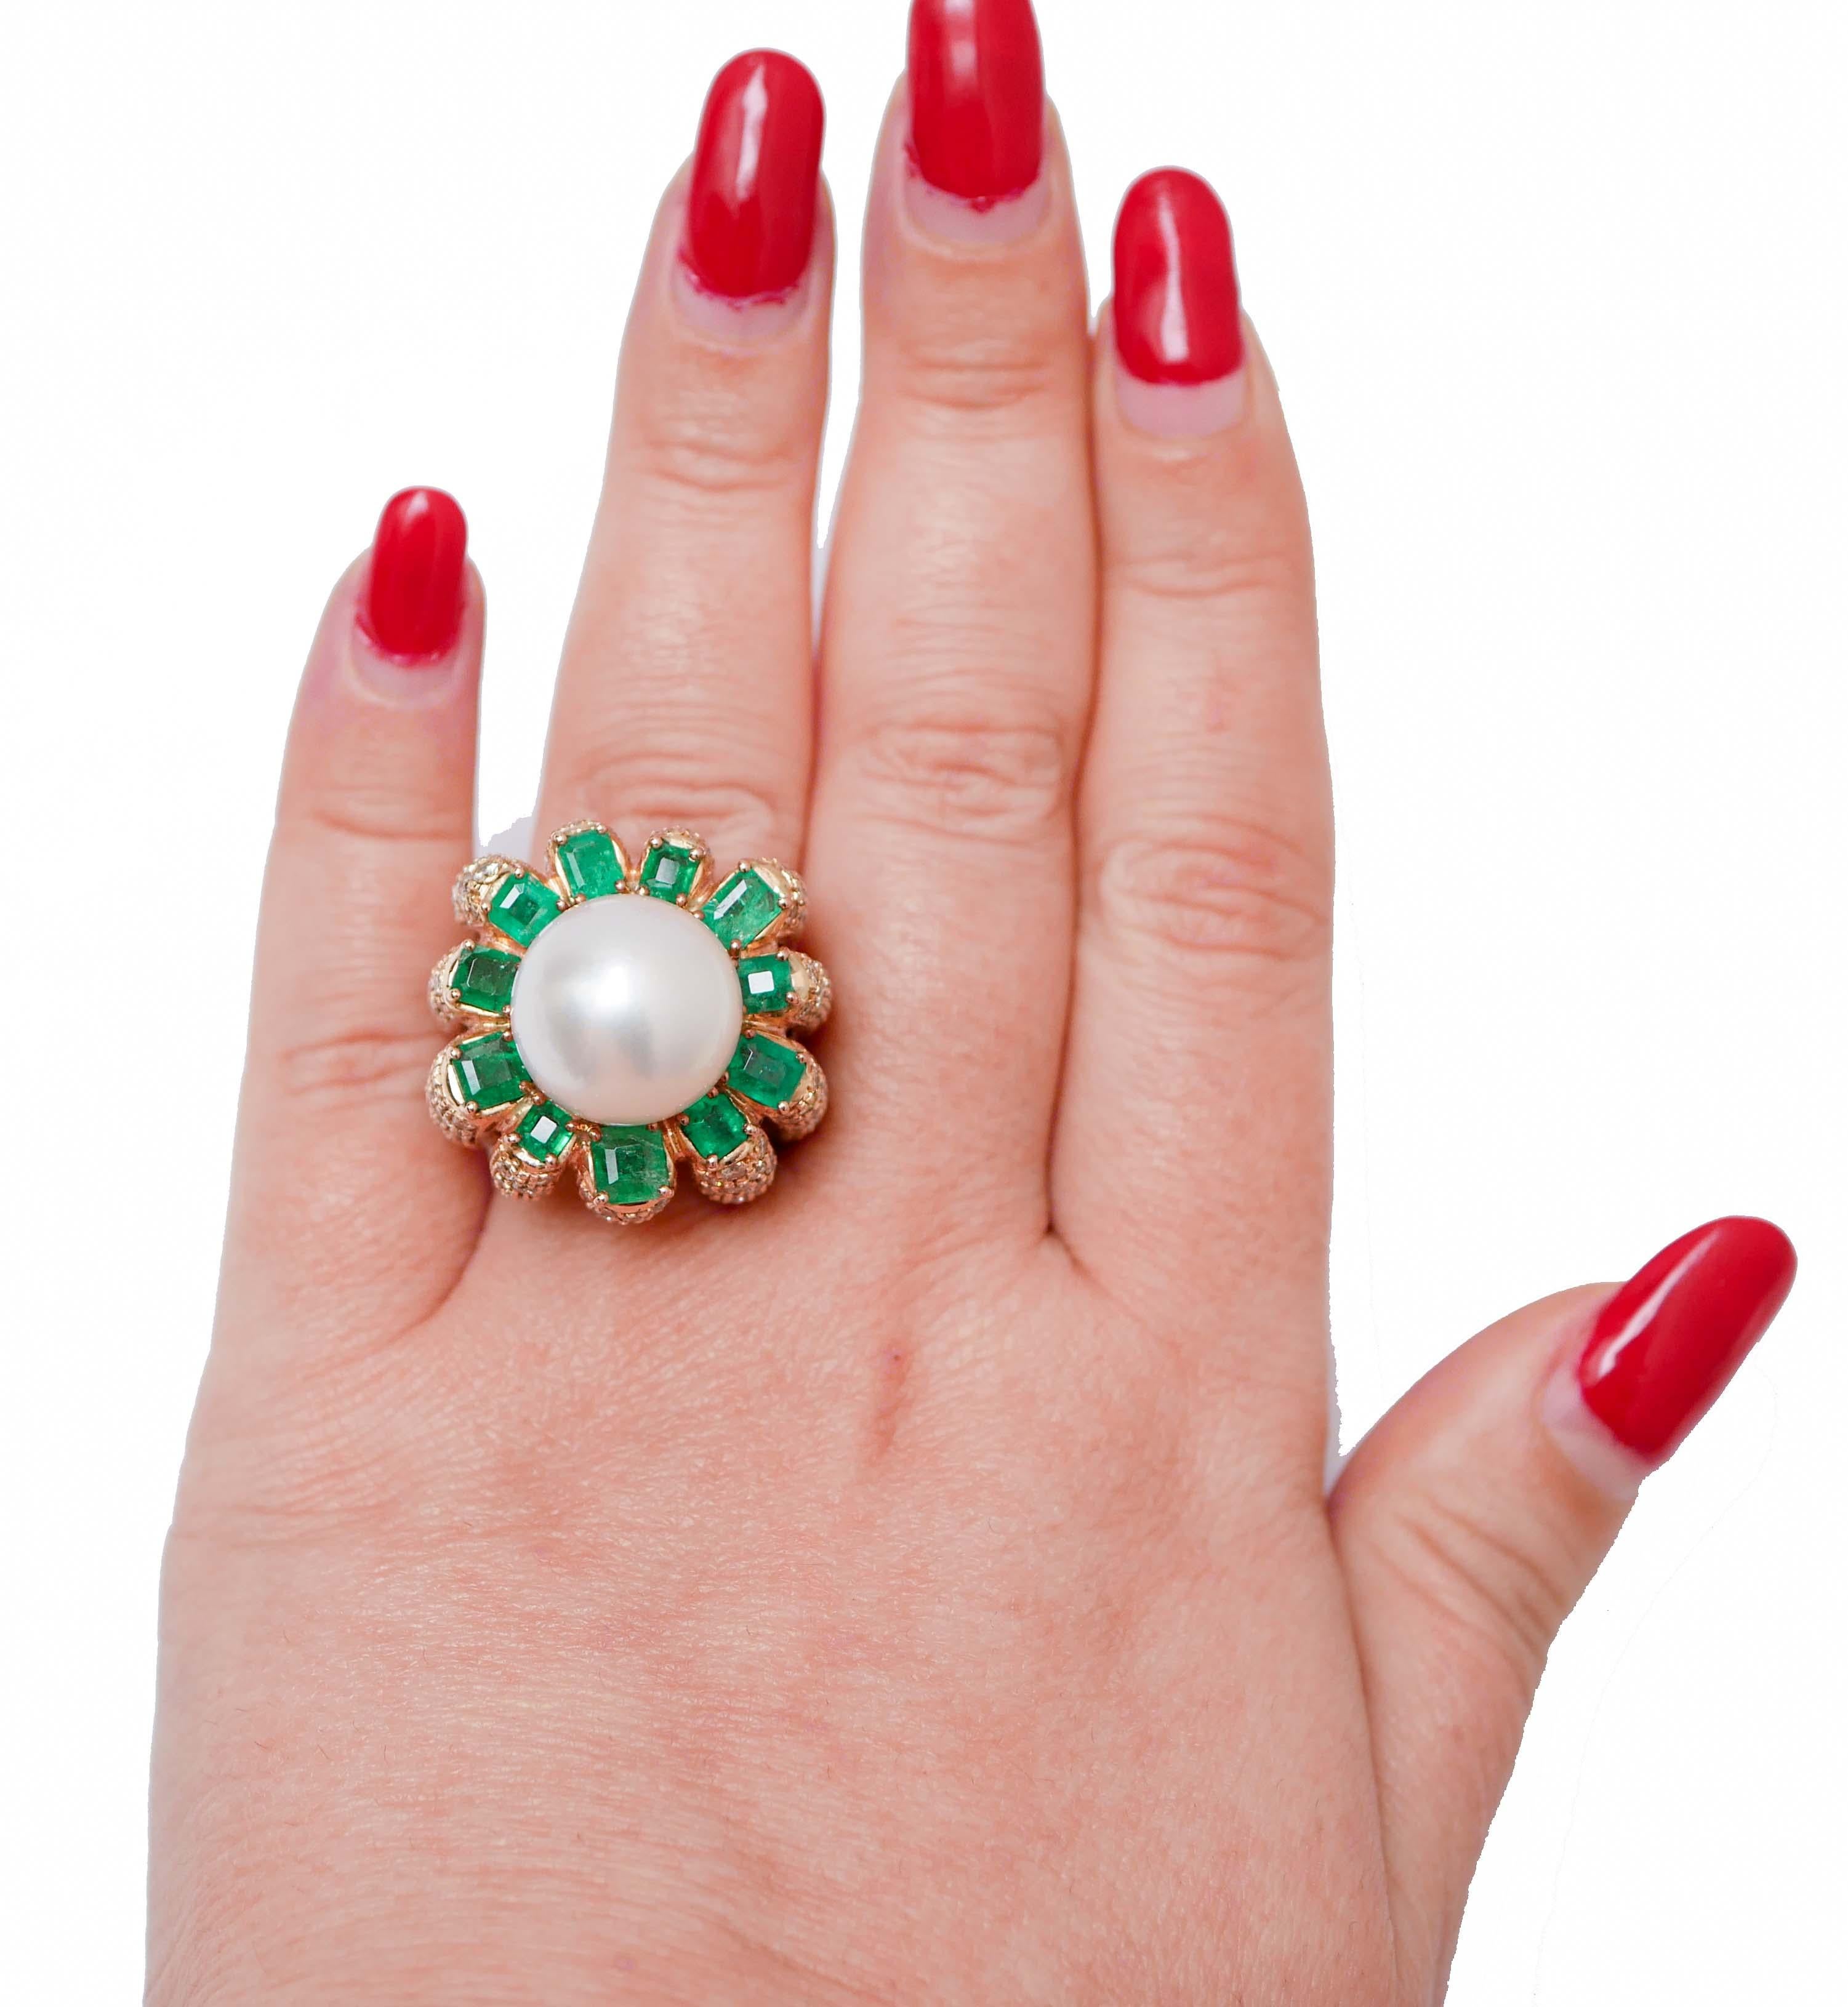 Mixed Cut South-Sea Pearl, Emeralds, Diamonds, 14 Karat Rose Gold Ring. For Sale